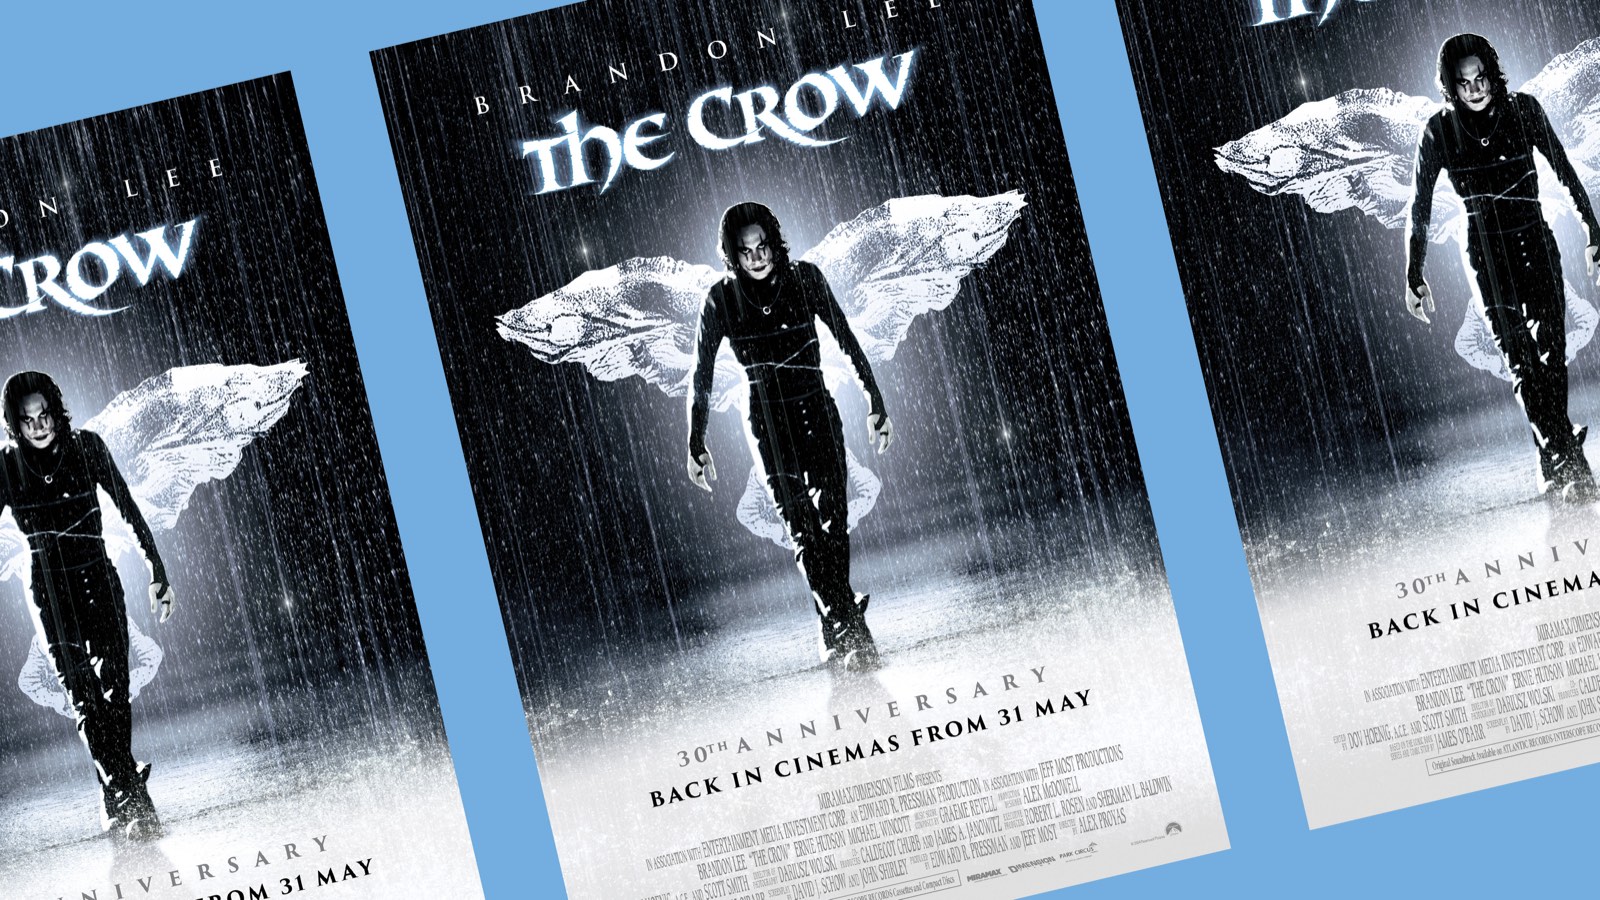 The Crow resurrects on the big screen - 30th anniversary re-release announced